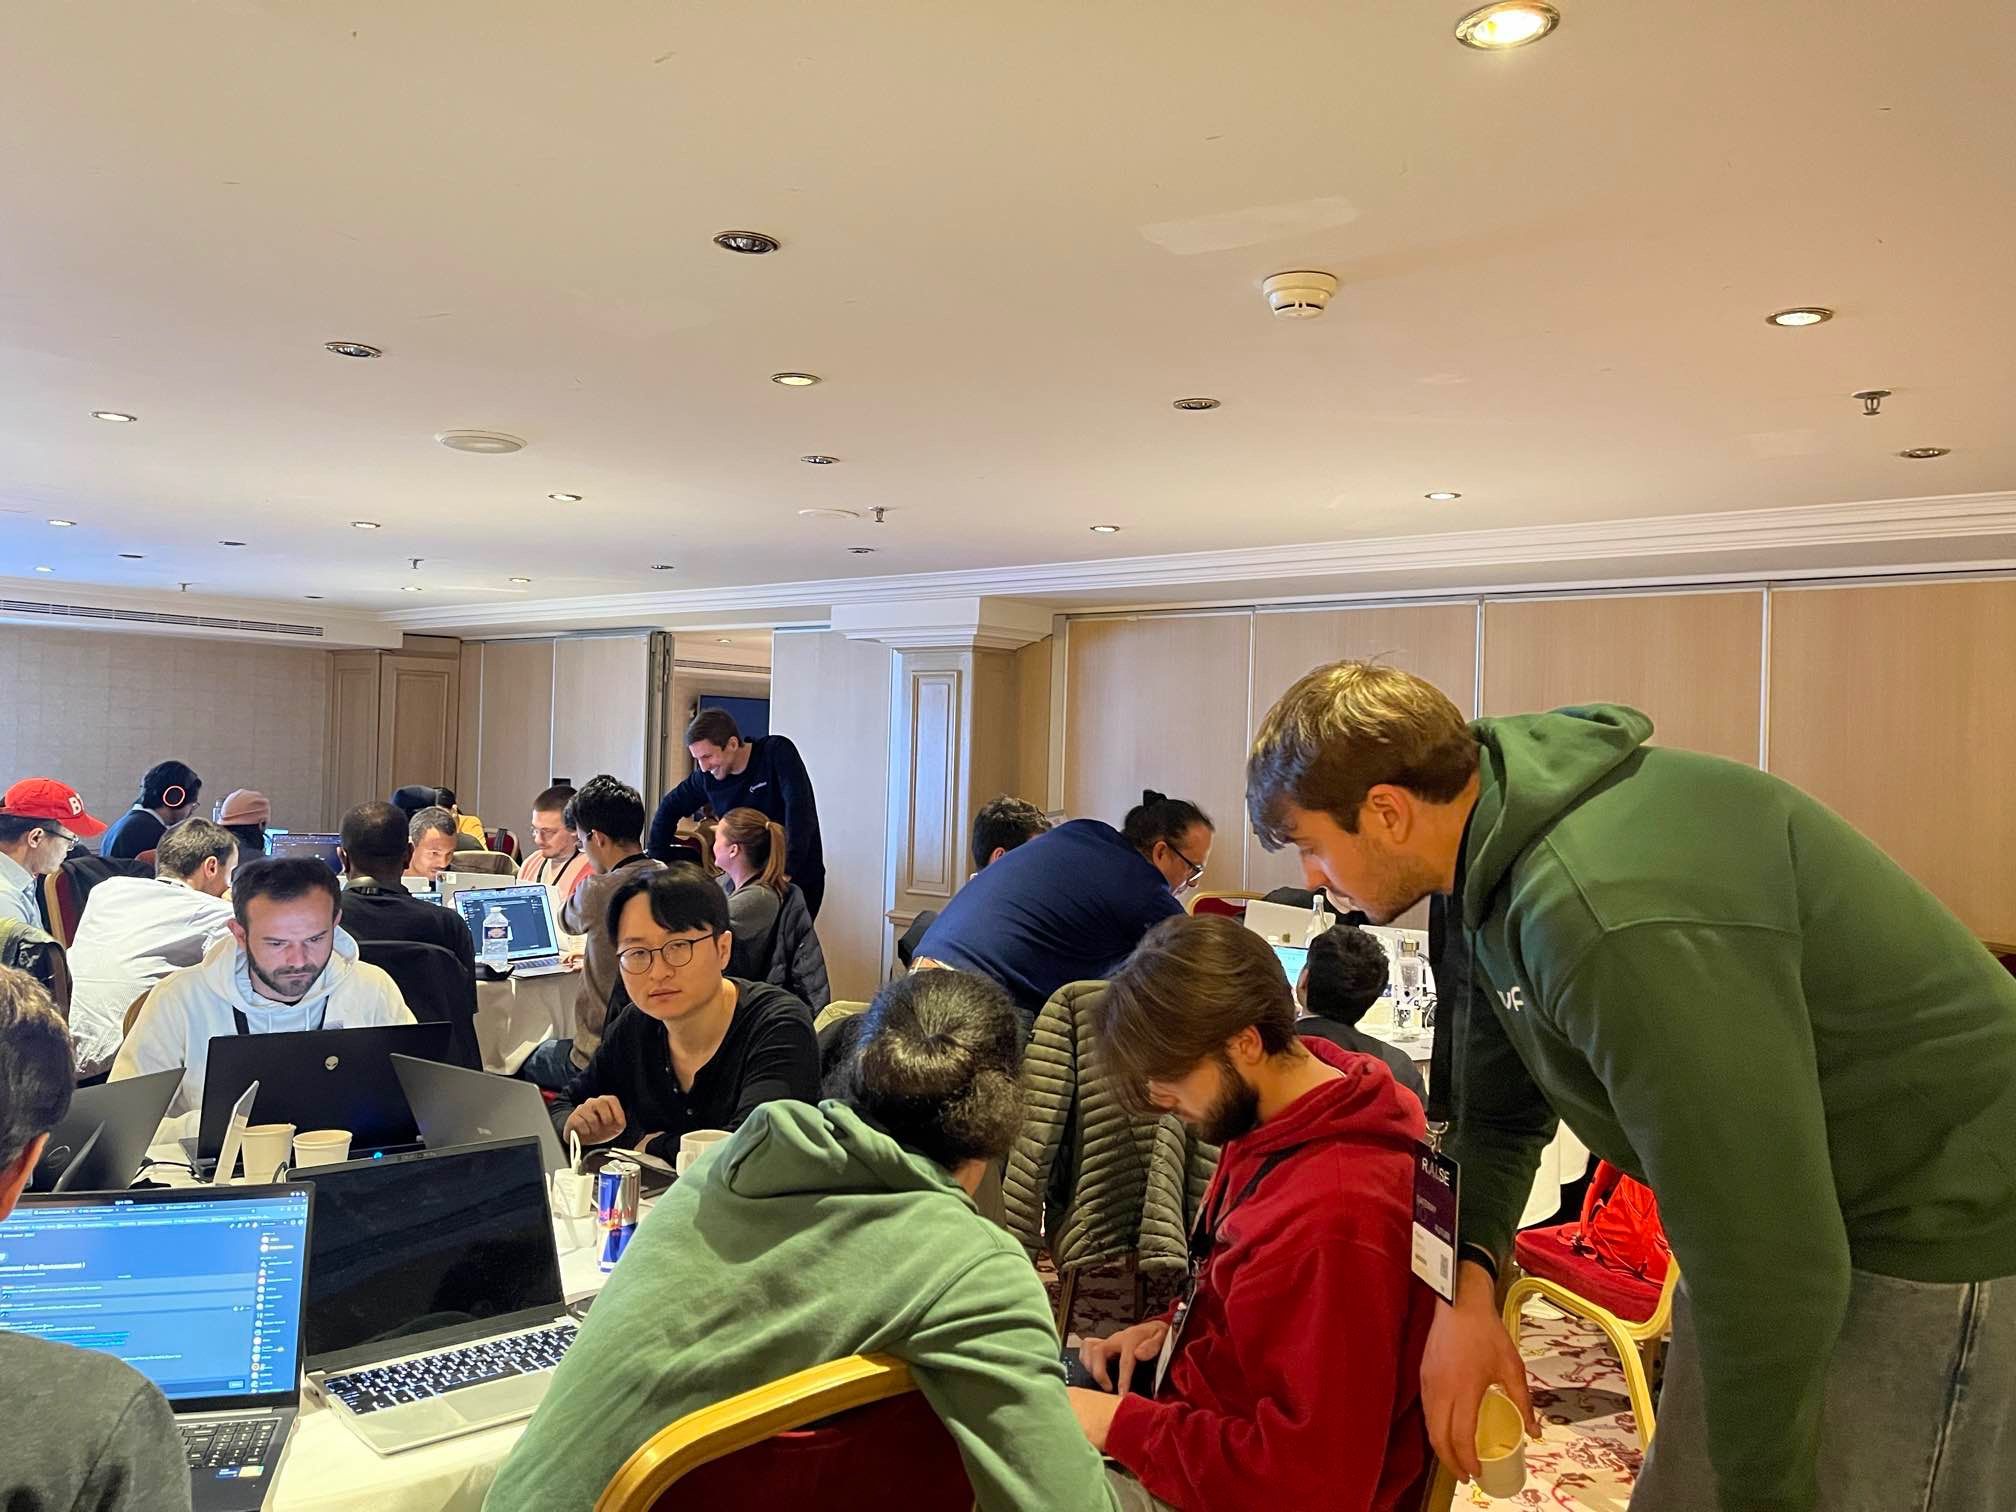 On the 8th of April, our CEO, Florian Barbaro, PhD, was a mentor at the hackathon organized by Mistral AI and Roosh Circle during the RAISE Summit. The Dev Arena was the epicentre for companies shaping the future of generative AI with a unique AI hackathon. It brought together top developers and scientists, fostering collaboration to create forward-looking solutions. Various tracks were offered to address today's most challenging AI topics. Impressive to see the enthusiasm GenAI is generating in France. Thank you, ￼Bogdan Ponomar and ￼Veronika Ilnitska, for the invitation!